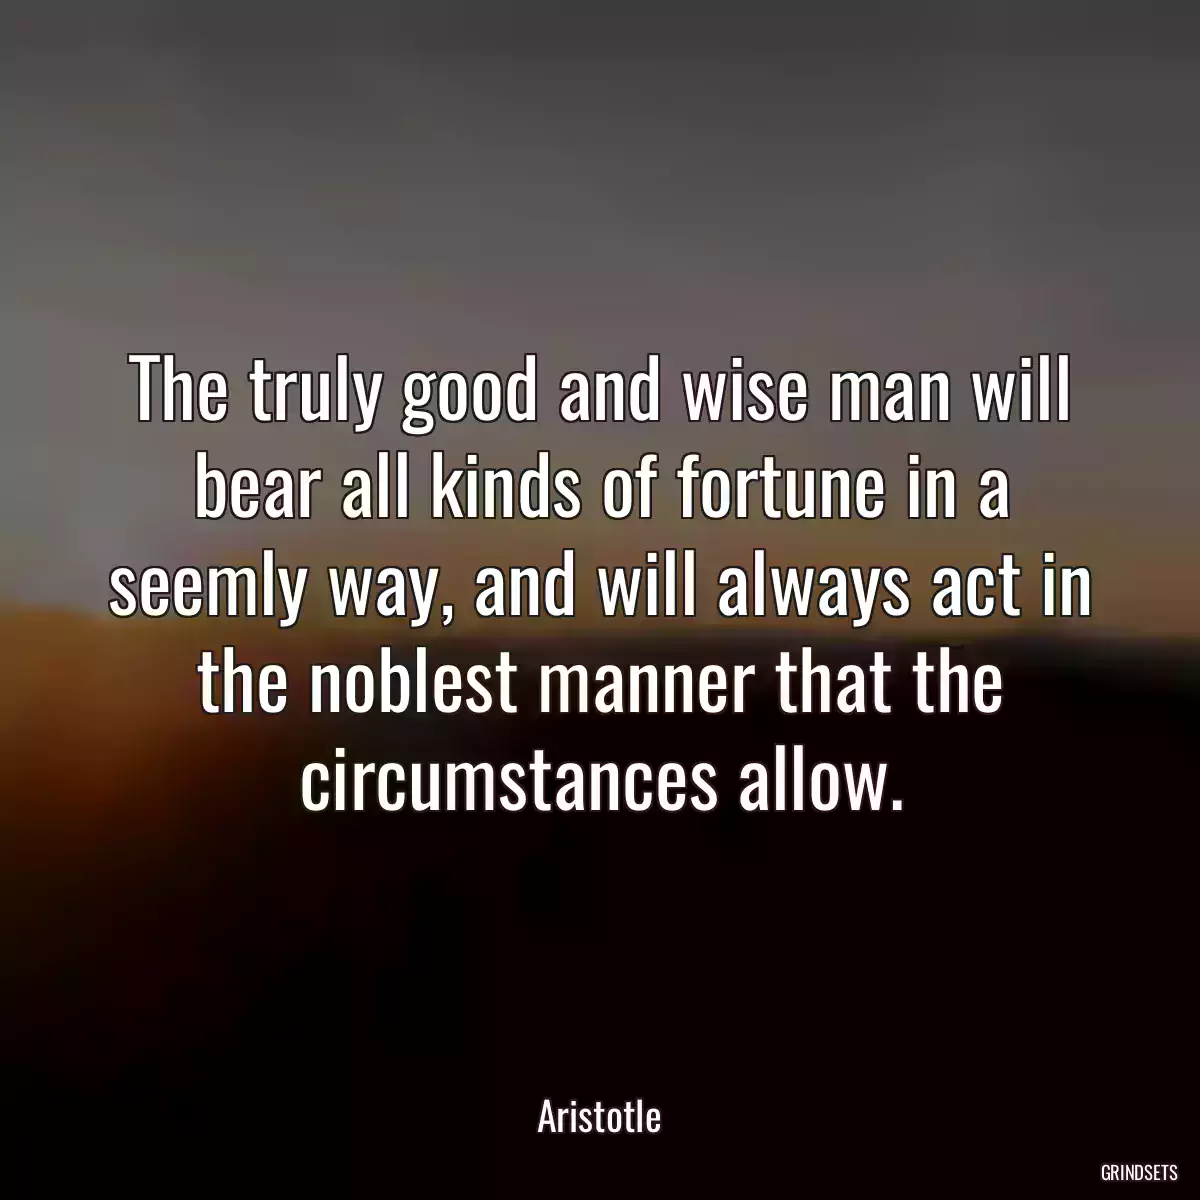 The truly good and wise man will bear all kinds of fortune in a seemly way, and will always act in the noblest manner that the circumstances allow.